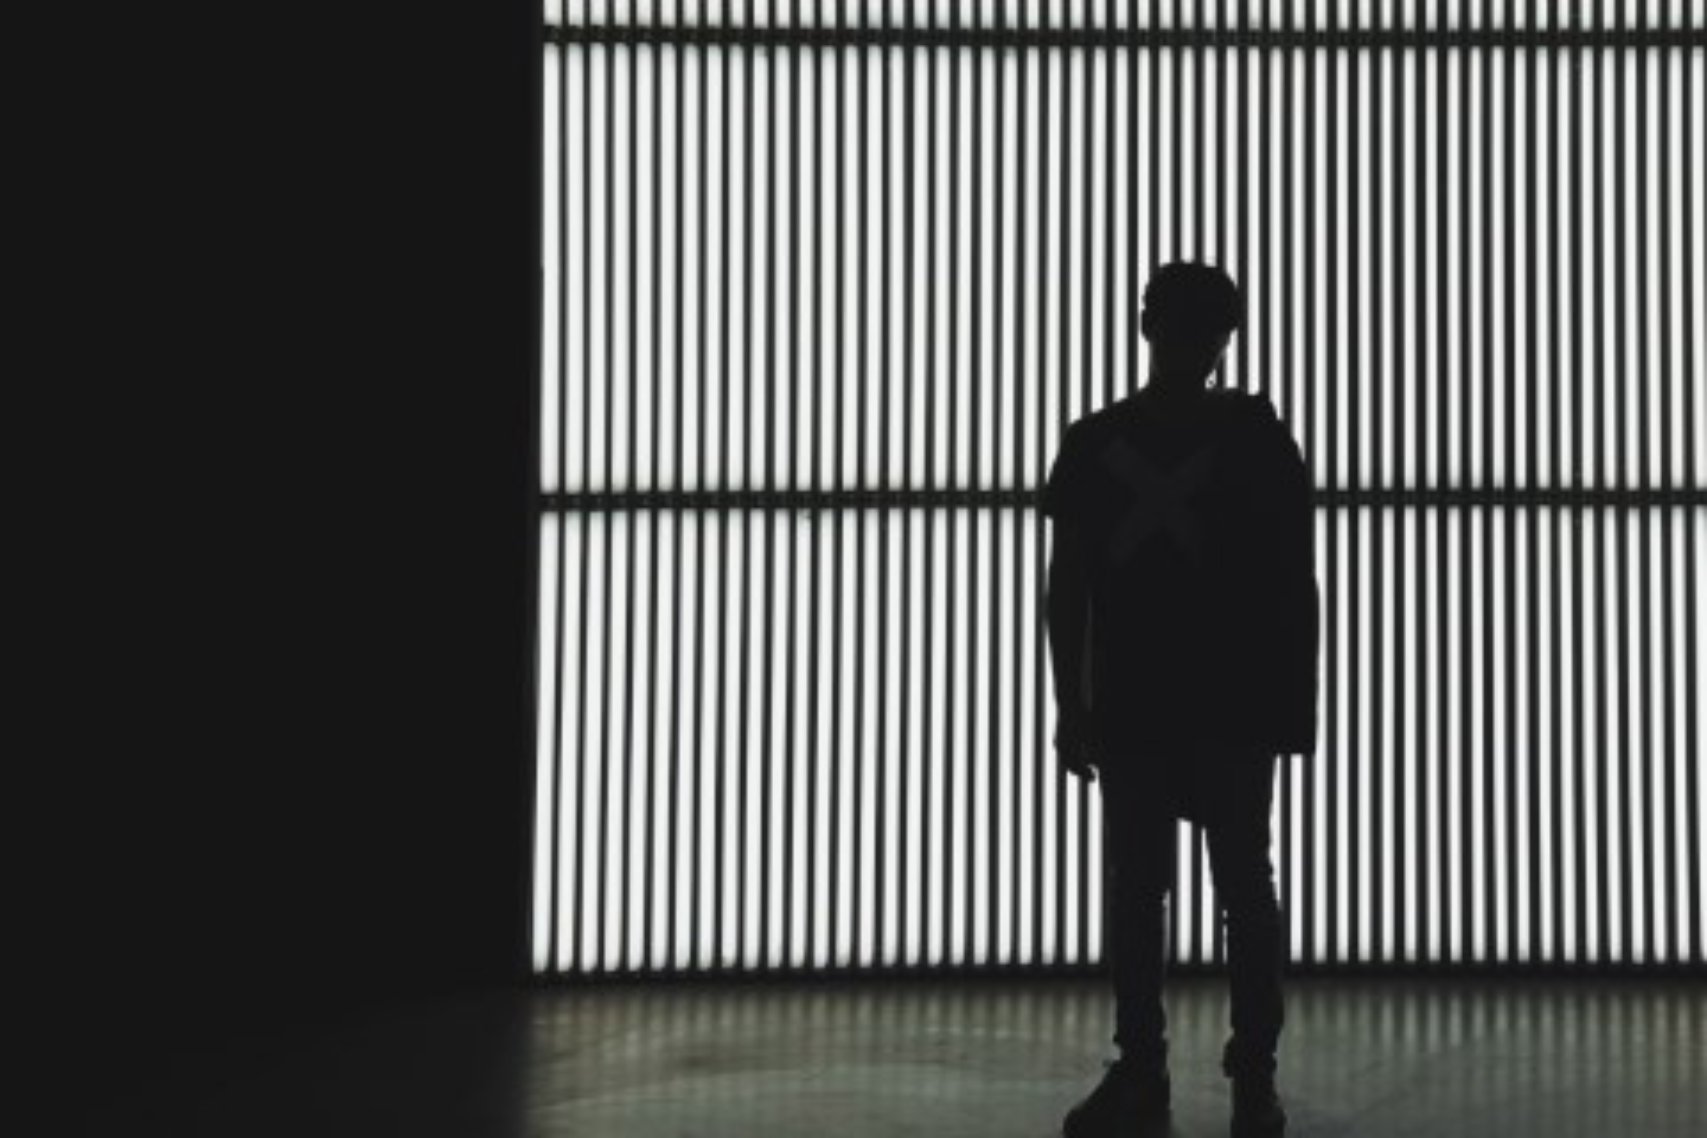 Silhouette of a person standing in a dark room